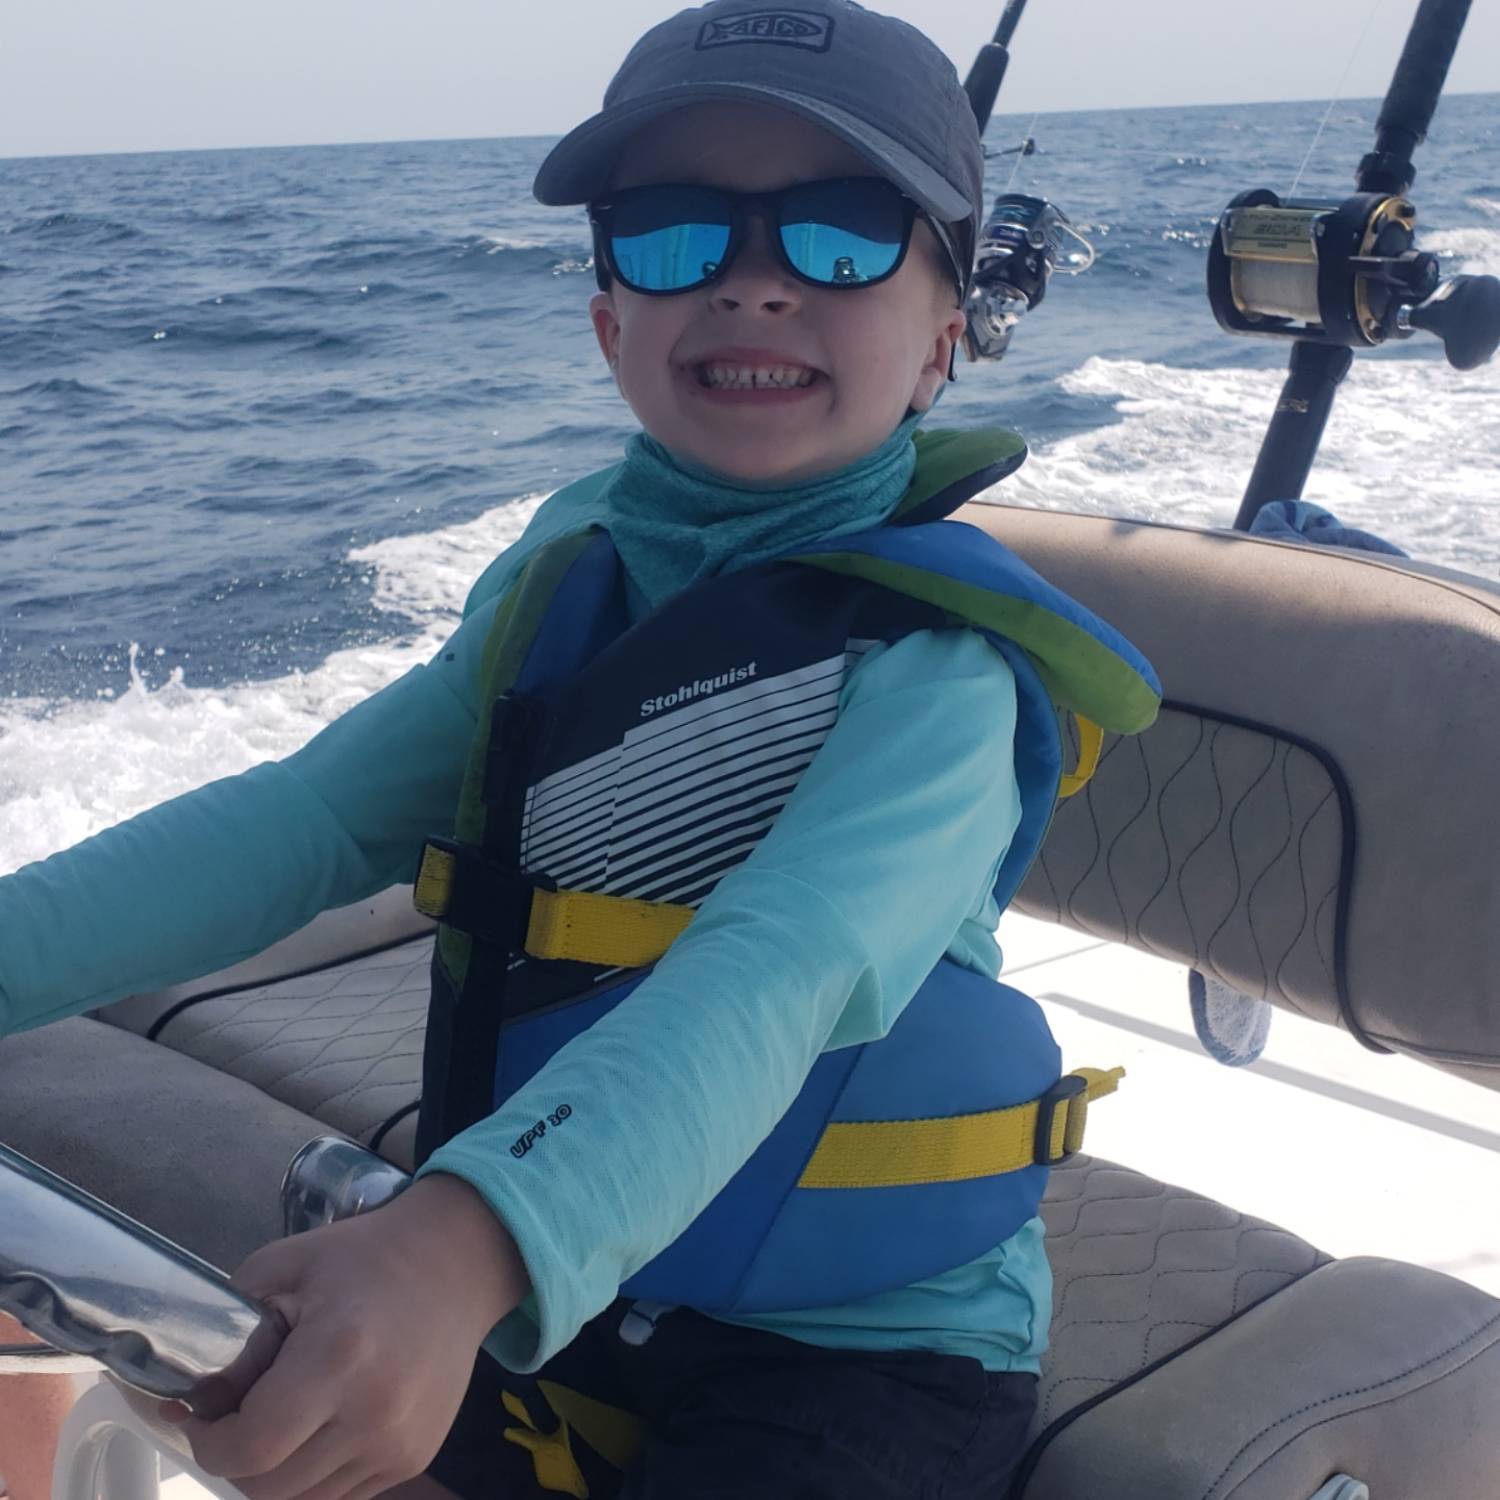 Title: Little kipper! - On board their Sportsman Masters 227 Bay Boat - Location: Orange beach al. Participating in the Photo Contest #SportsmanSeptember2023